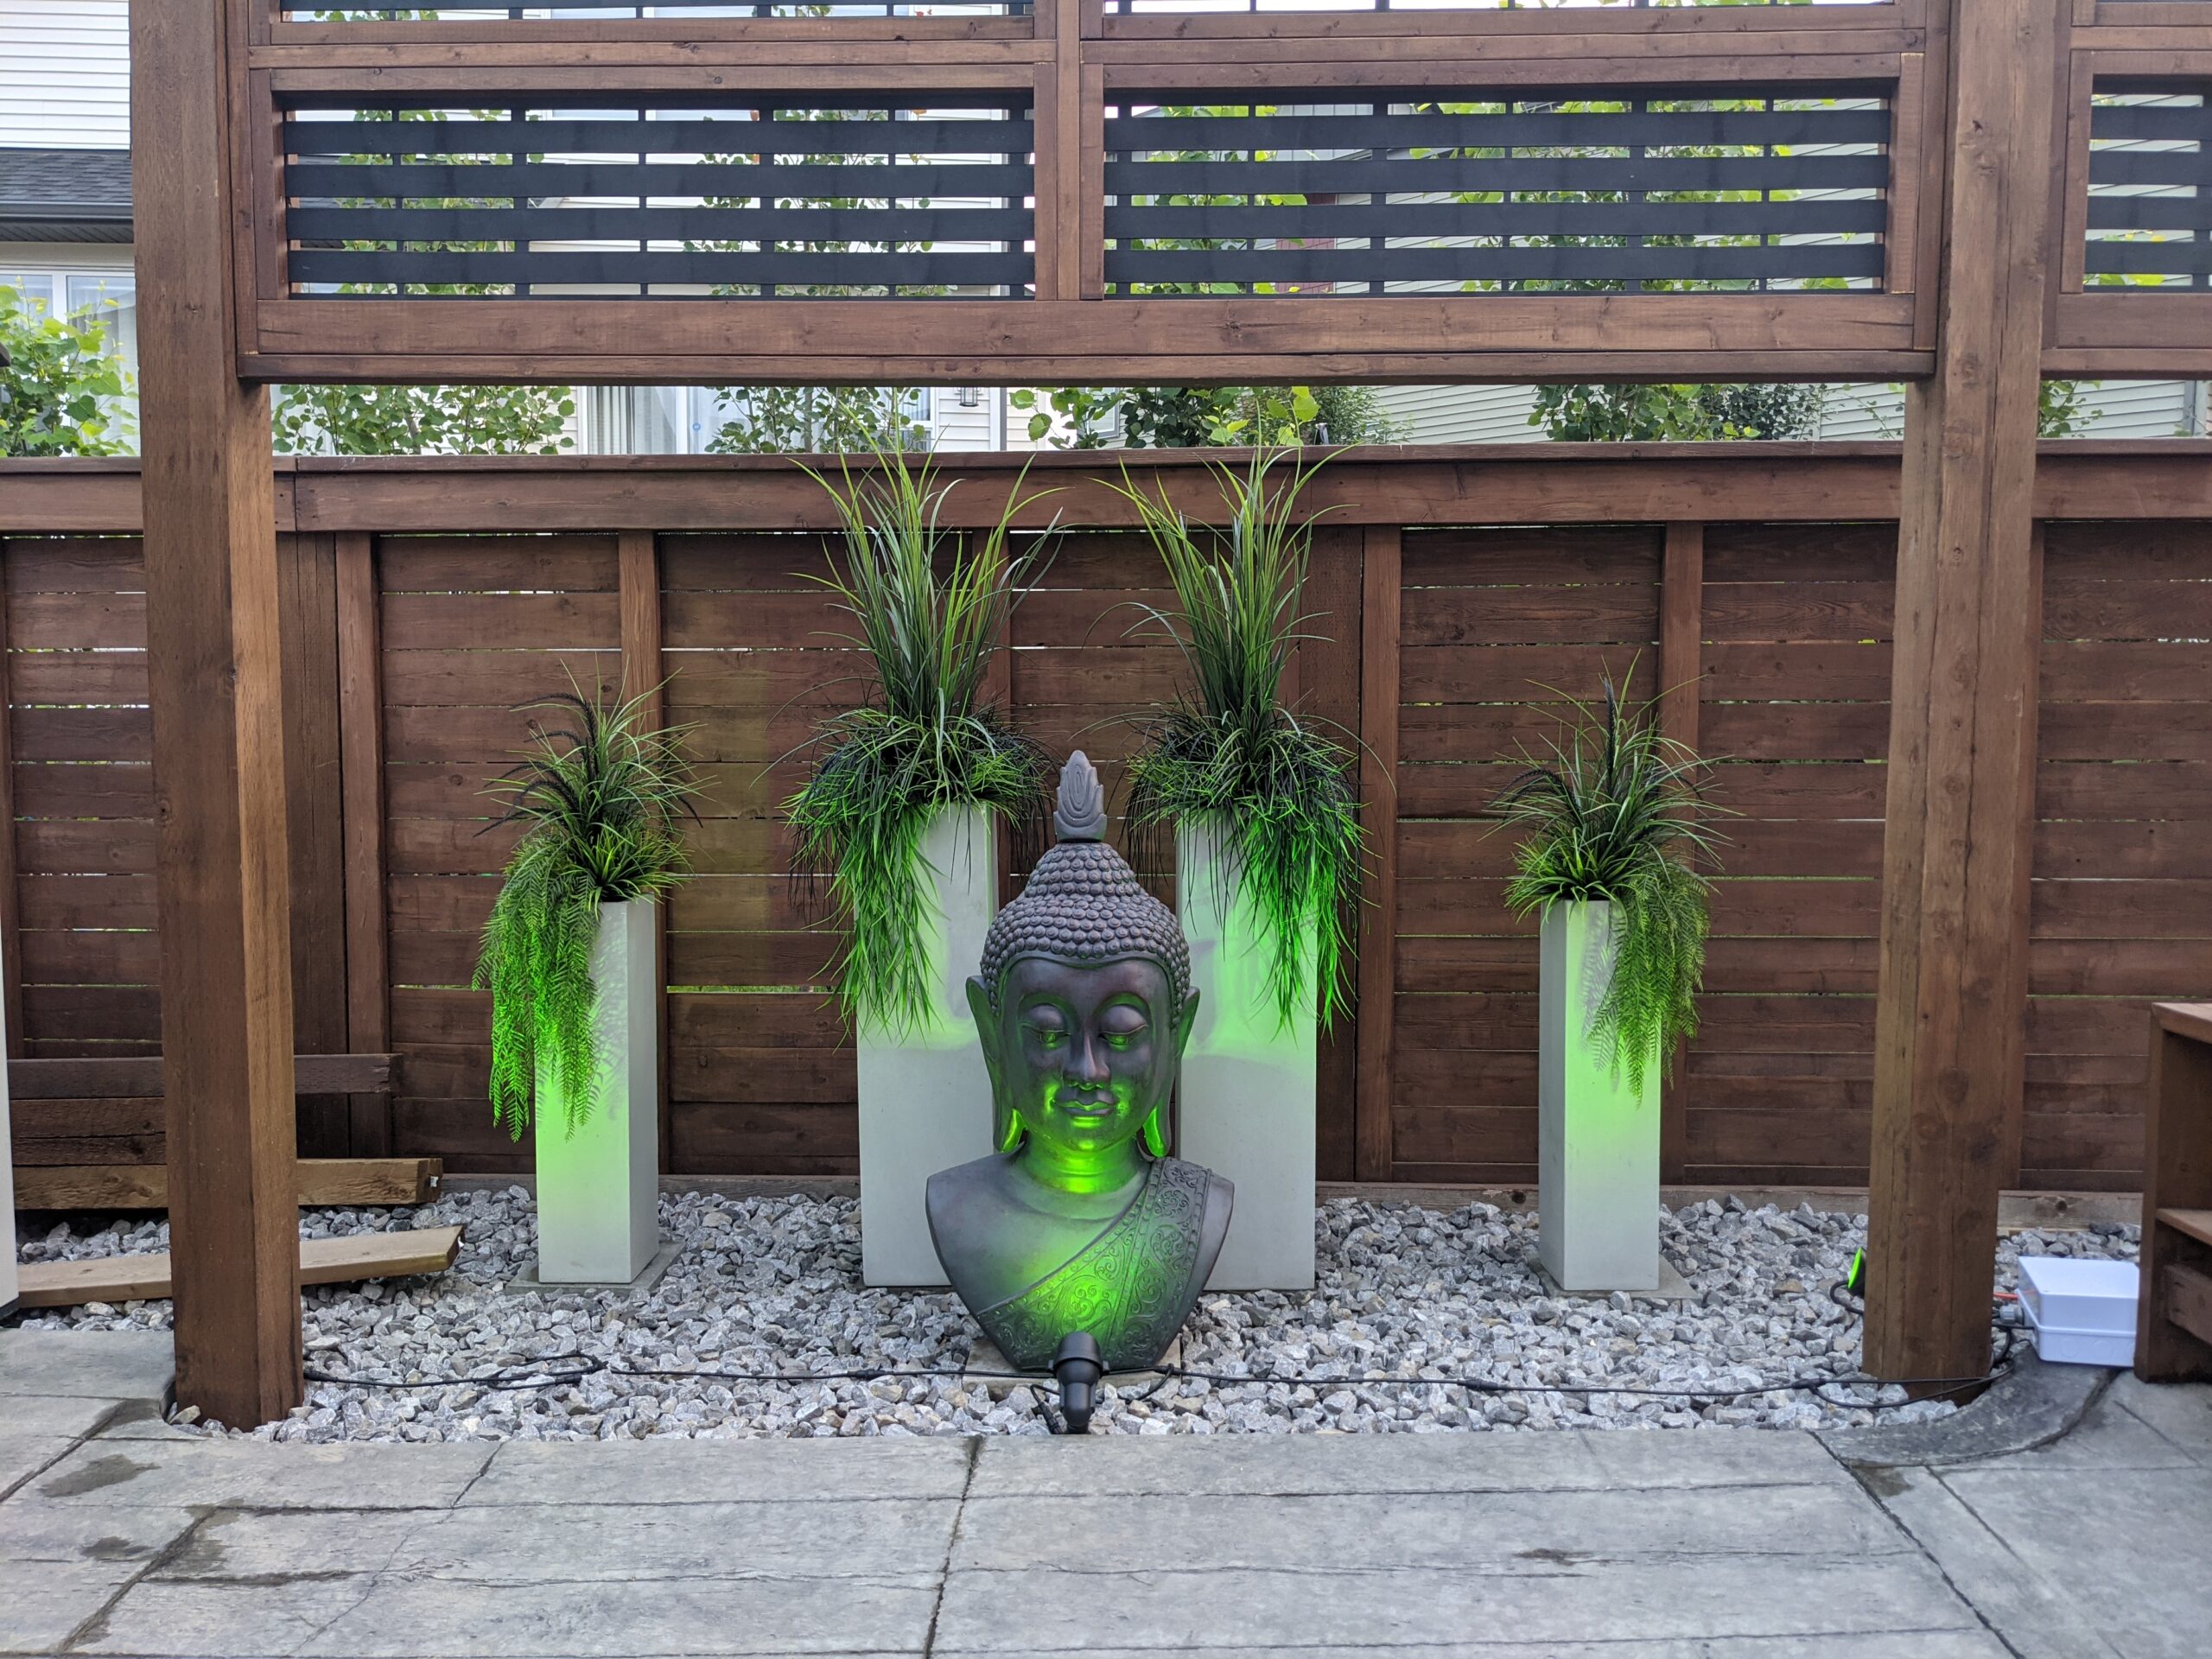 Watts Lights Landscape Lighting dressing up a Permanent Outdoor Feature in a Backyard